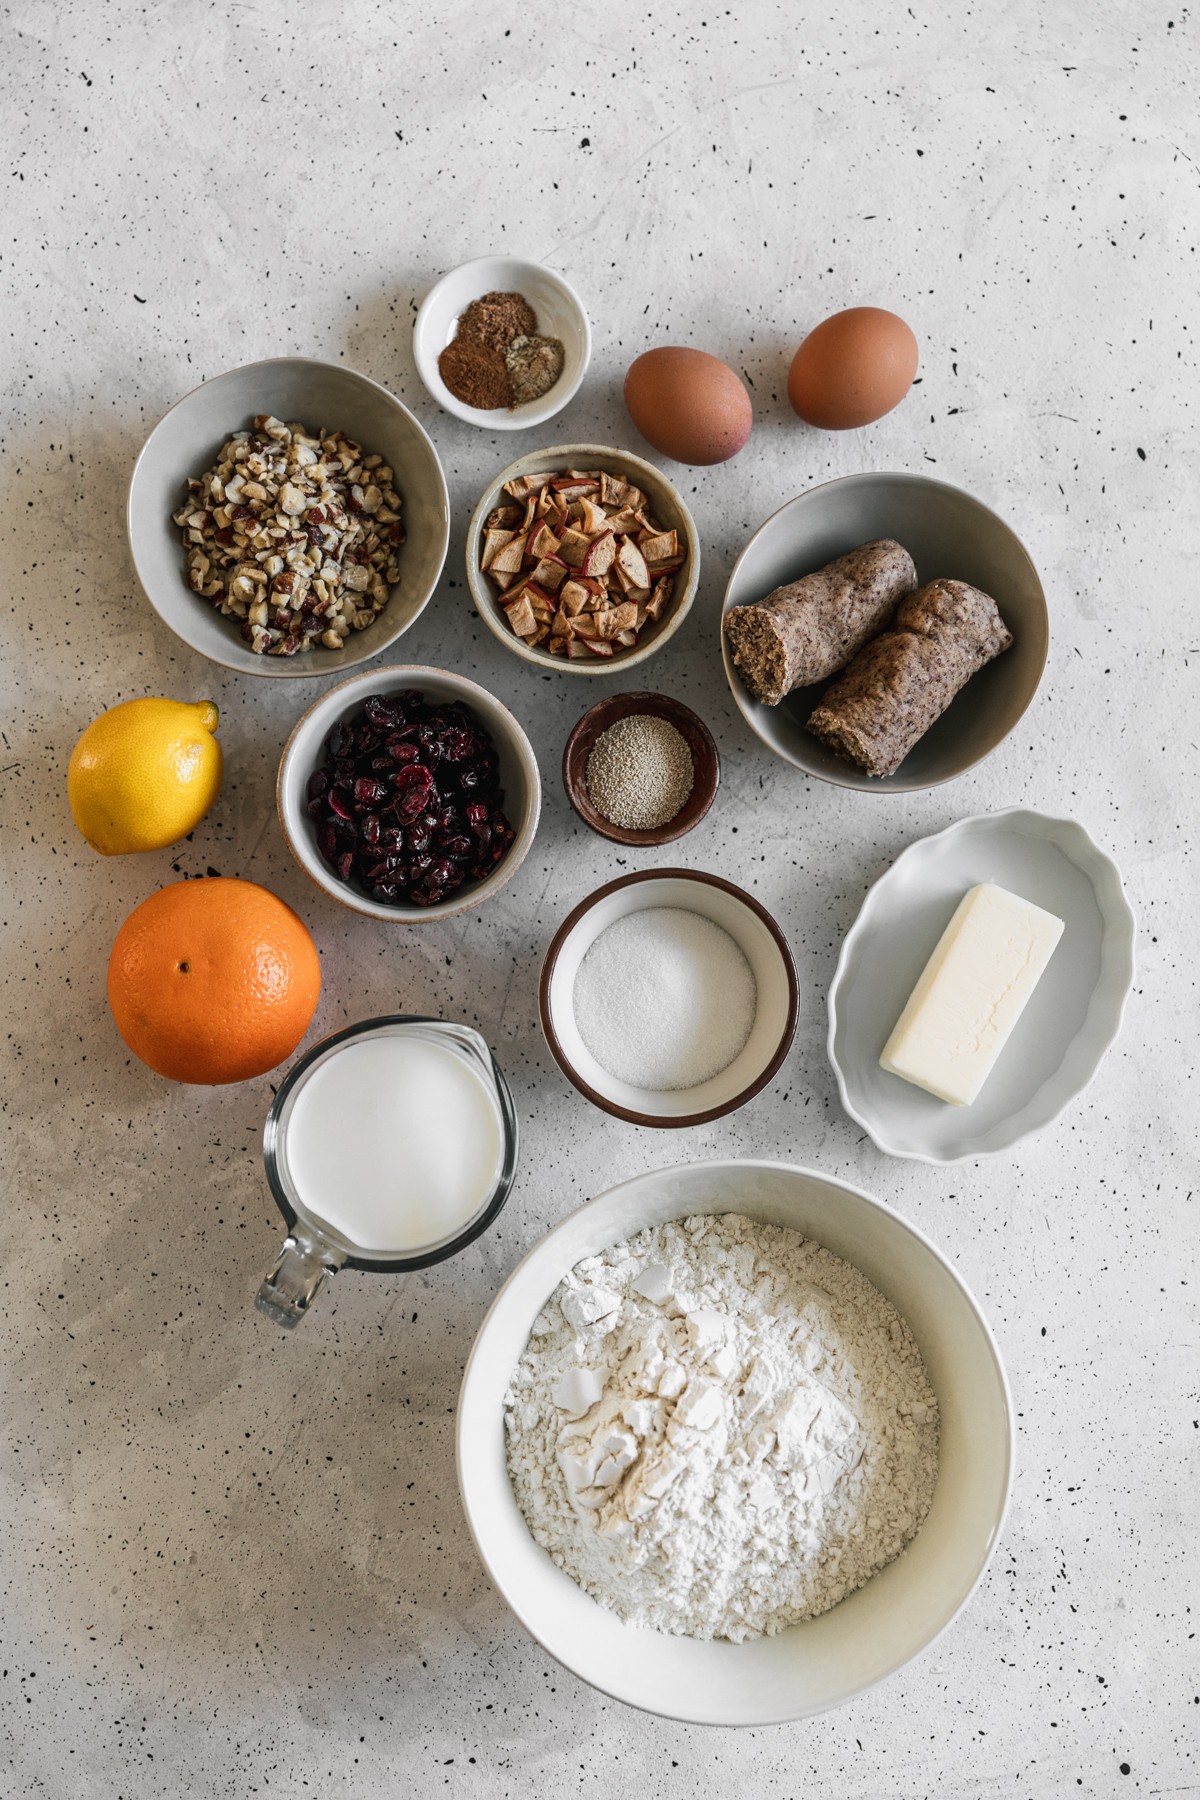 An overhead image of various white bowls with flour, dried apples, dried cranberries, butter, sugar, and spices on a speckled white table next to a measuring cup of milk, an orange, a lemon, and a wood bowl of yeast.